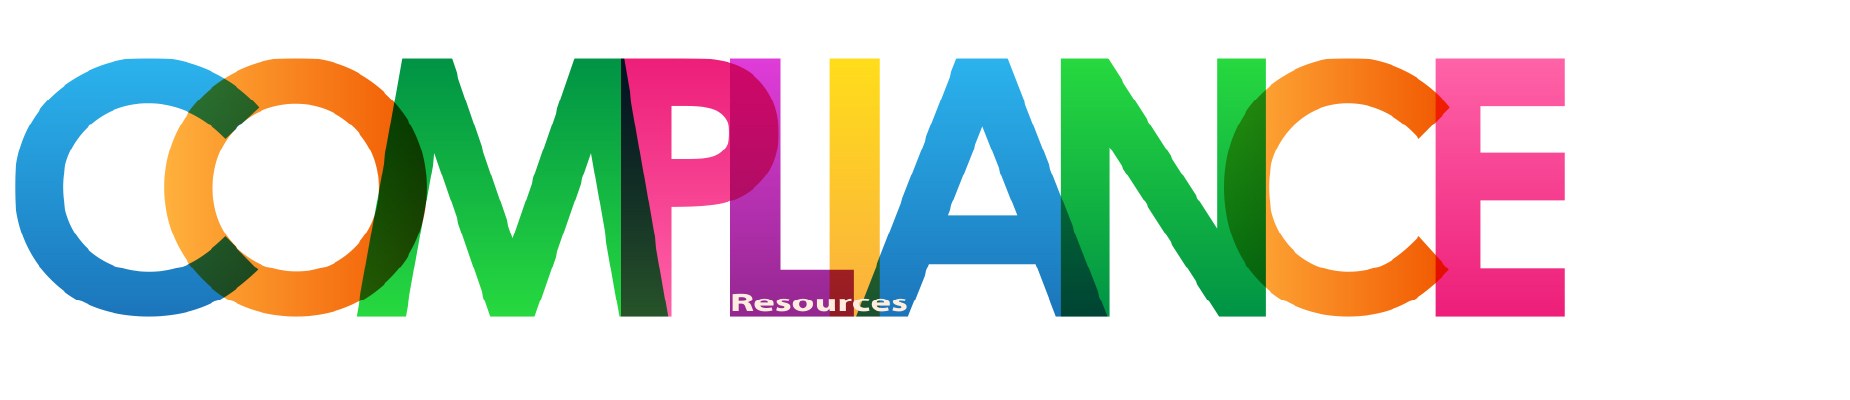 Multicolored block lettering spelling out "Compliance Resources"